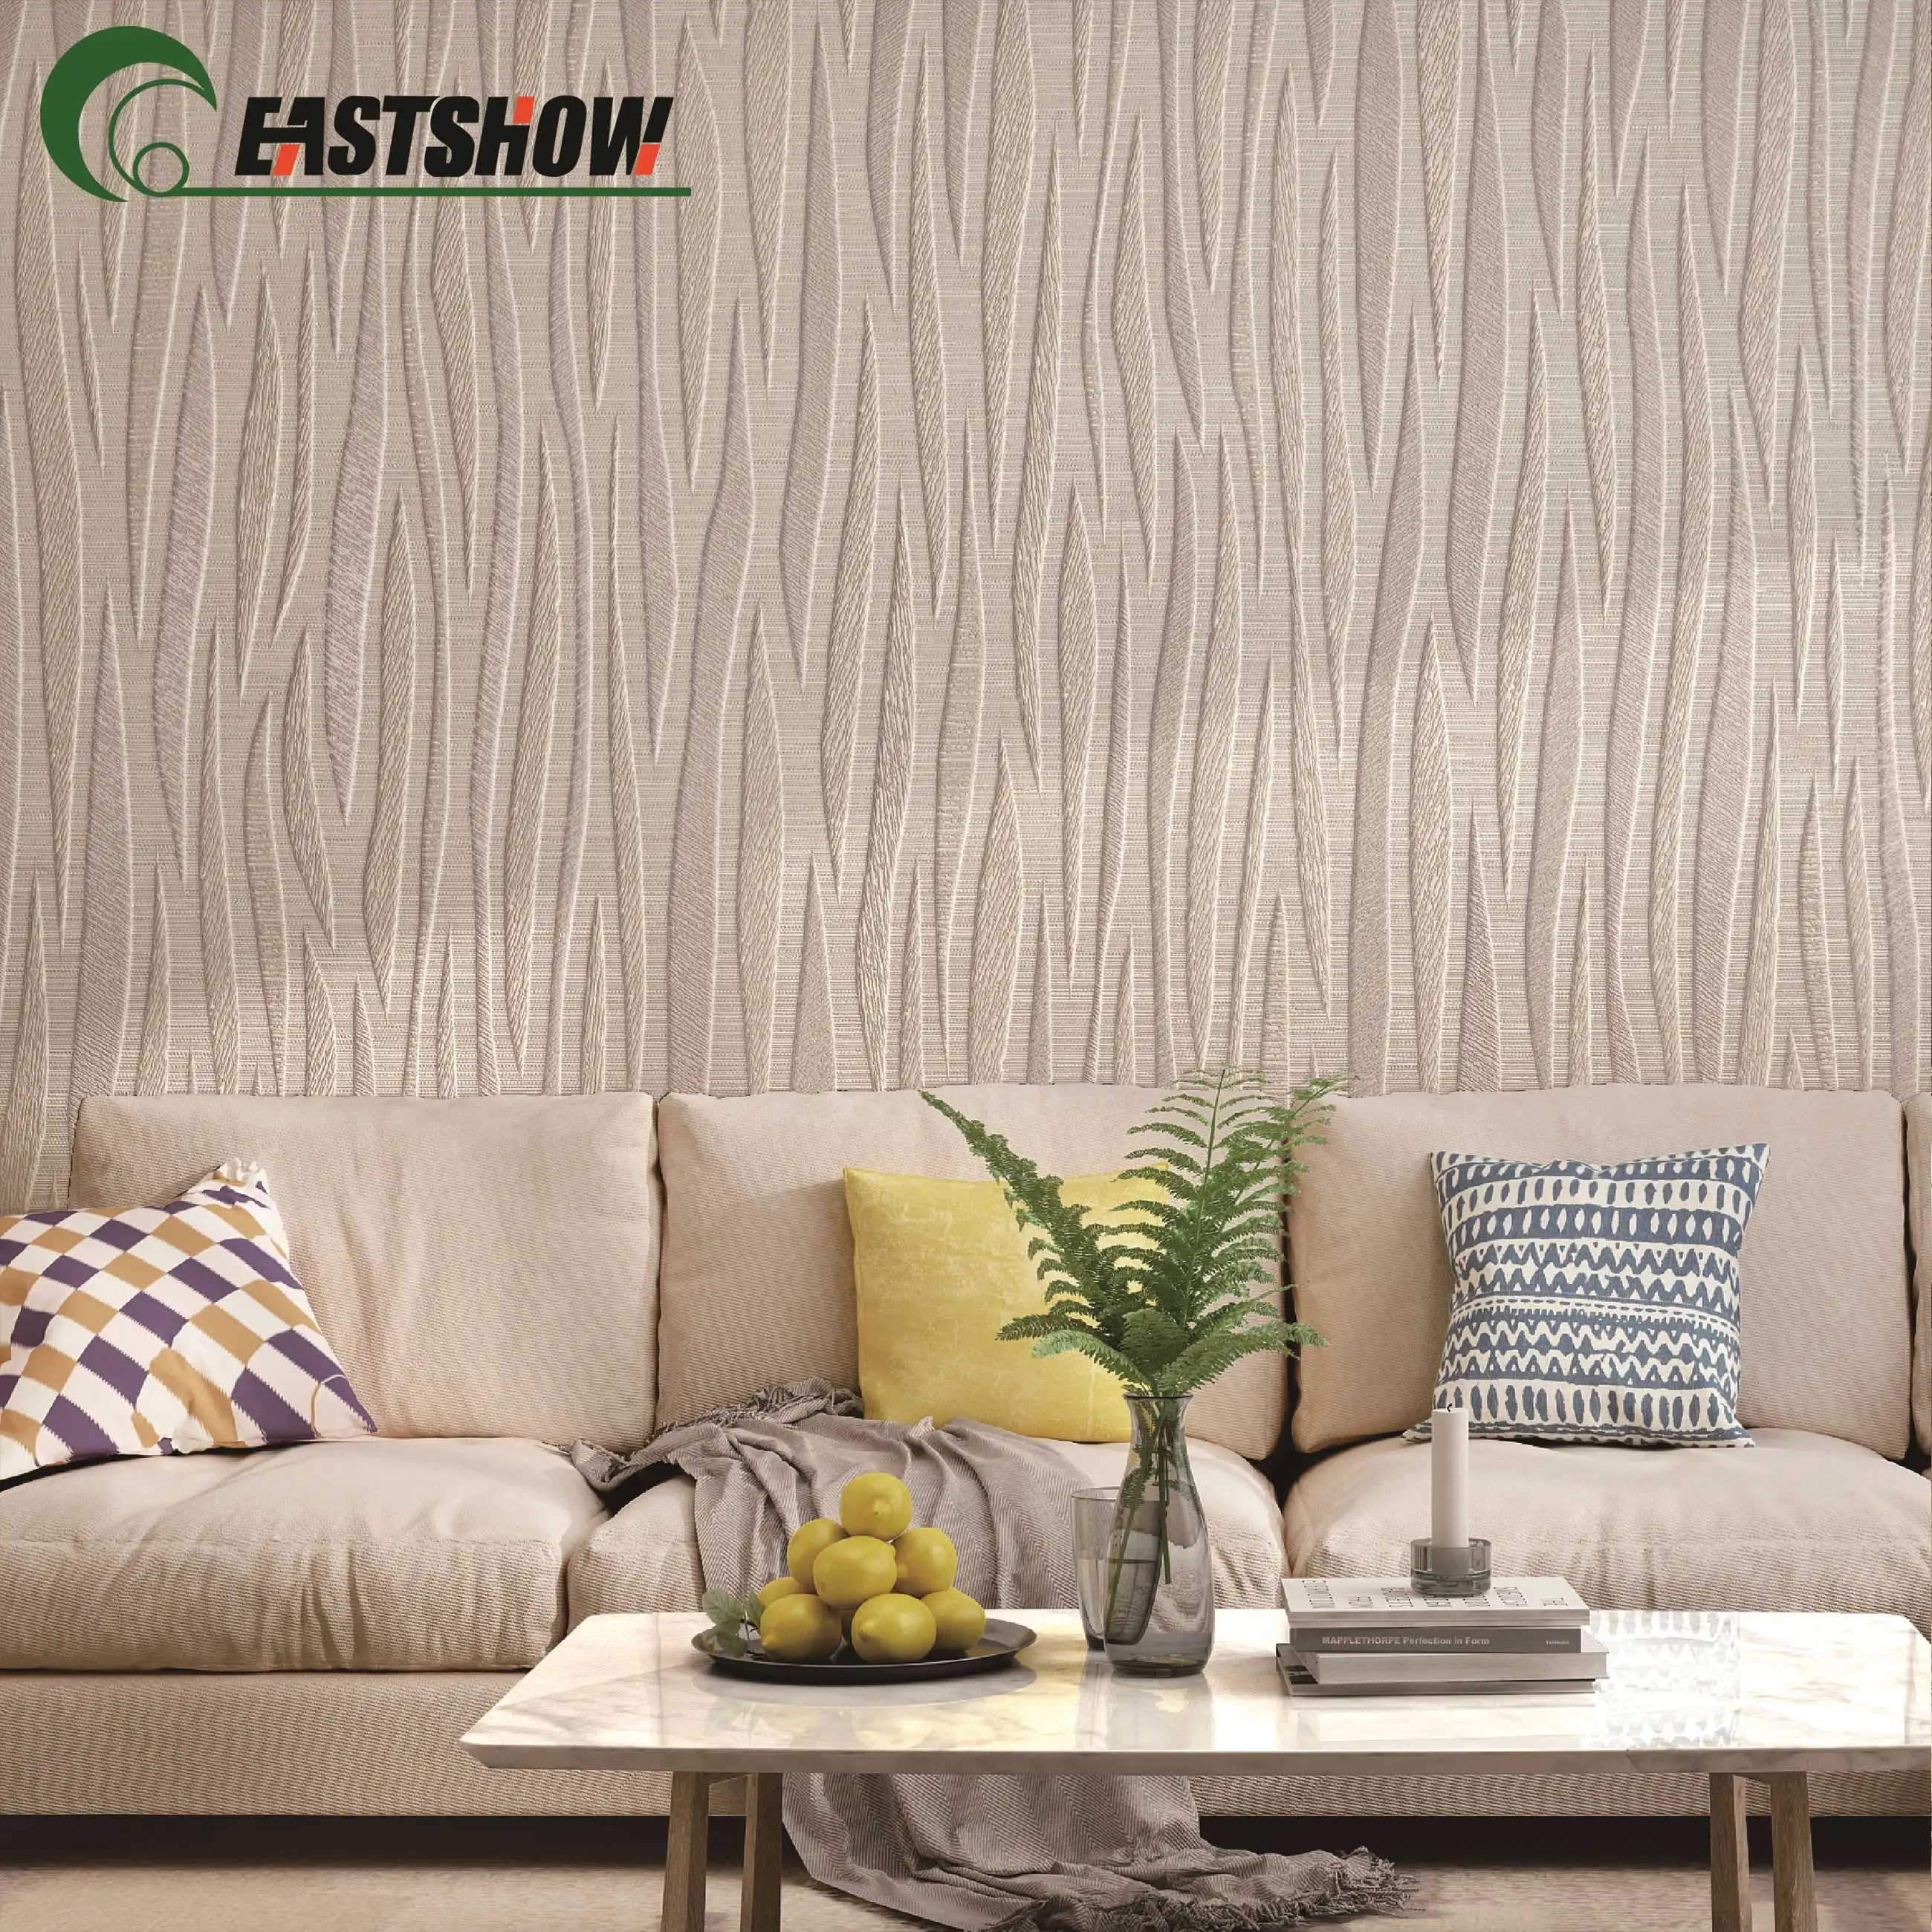 New Simple Design Pattern Pvc Wallpaper For Walls Decoration - Buy  Wallpapers/wall Coating,3d Wallpaper,Wallpaper Product on 